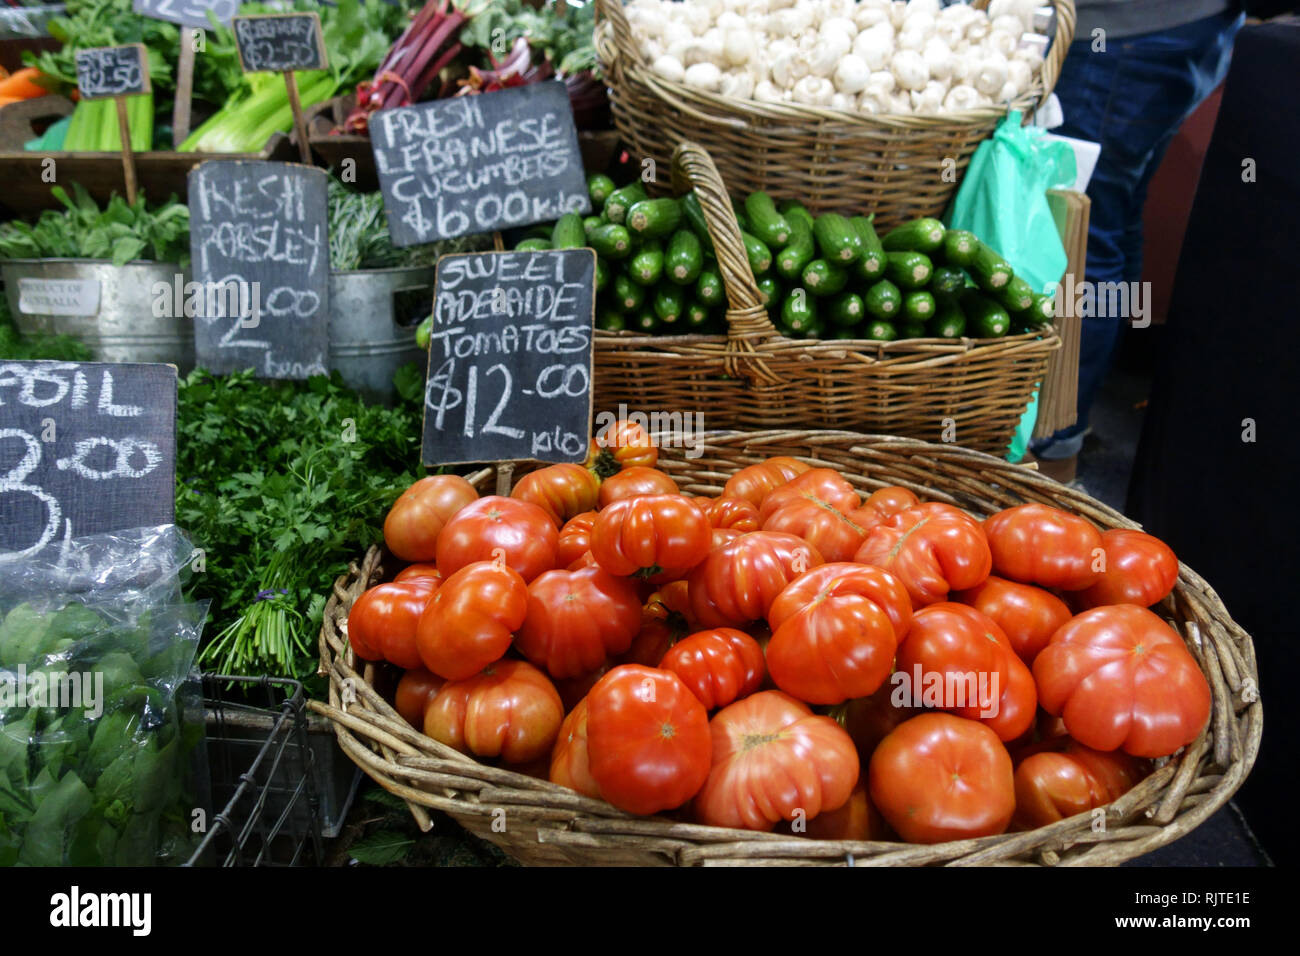 Fresh tomatoes, Lebanese cucumbers and other vegetables being sold at Queen Victoria Market Melbourne Victoria Australia Stock Photo